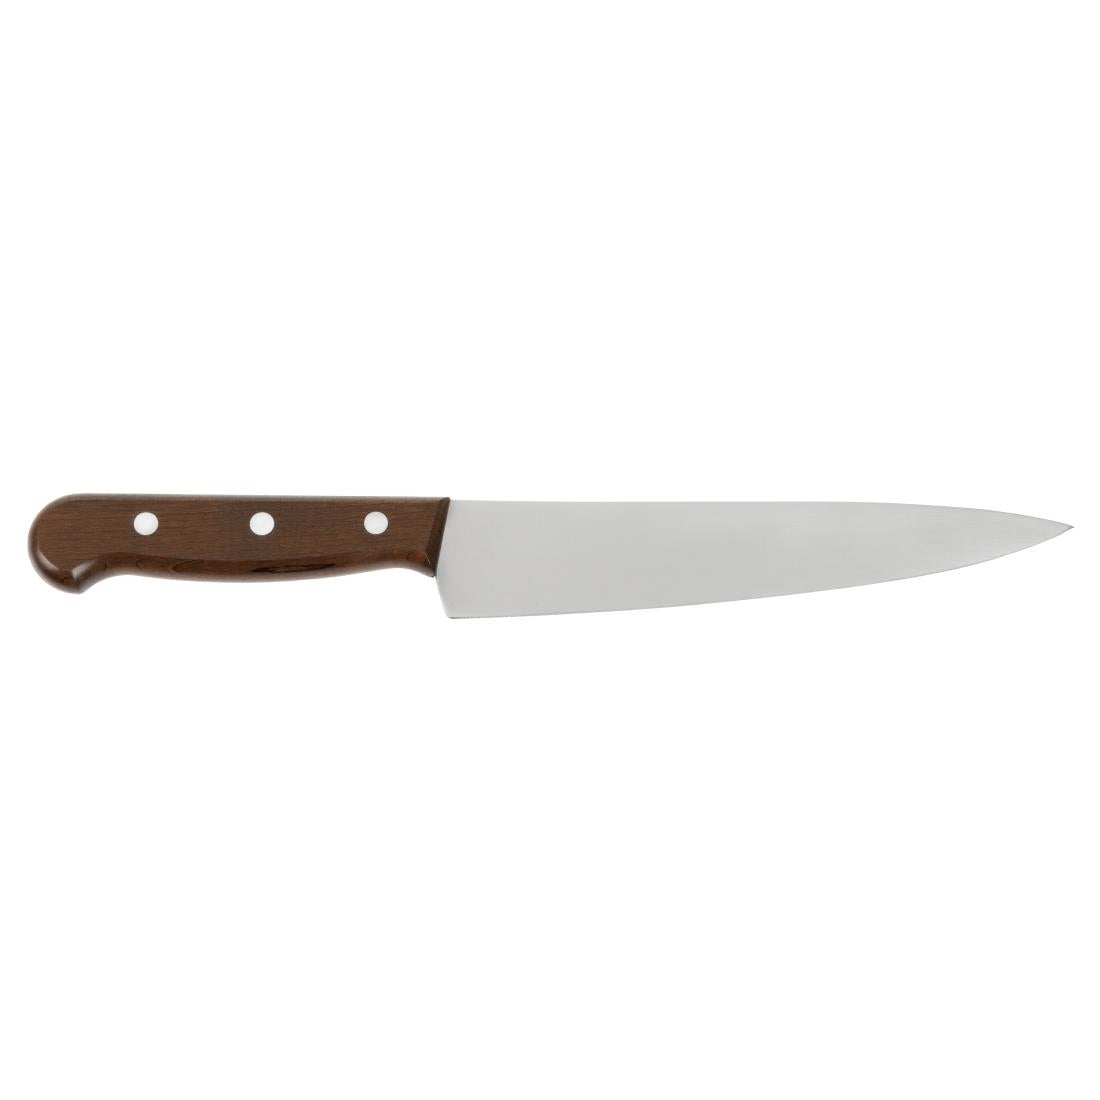 C604 Victorinox Wooden Handled Carving Knife 19cm